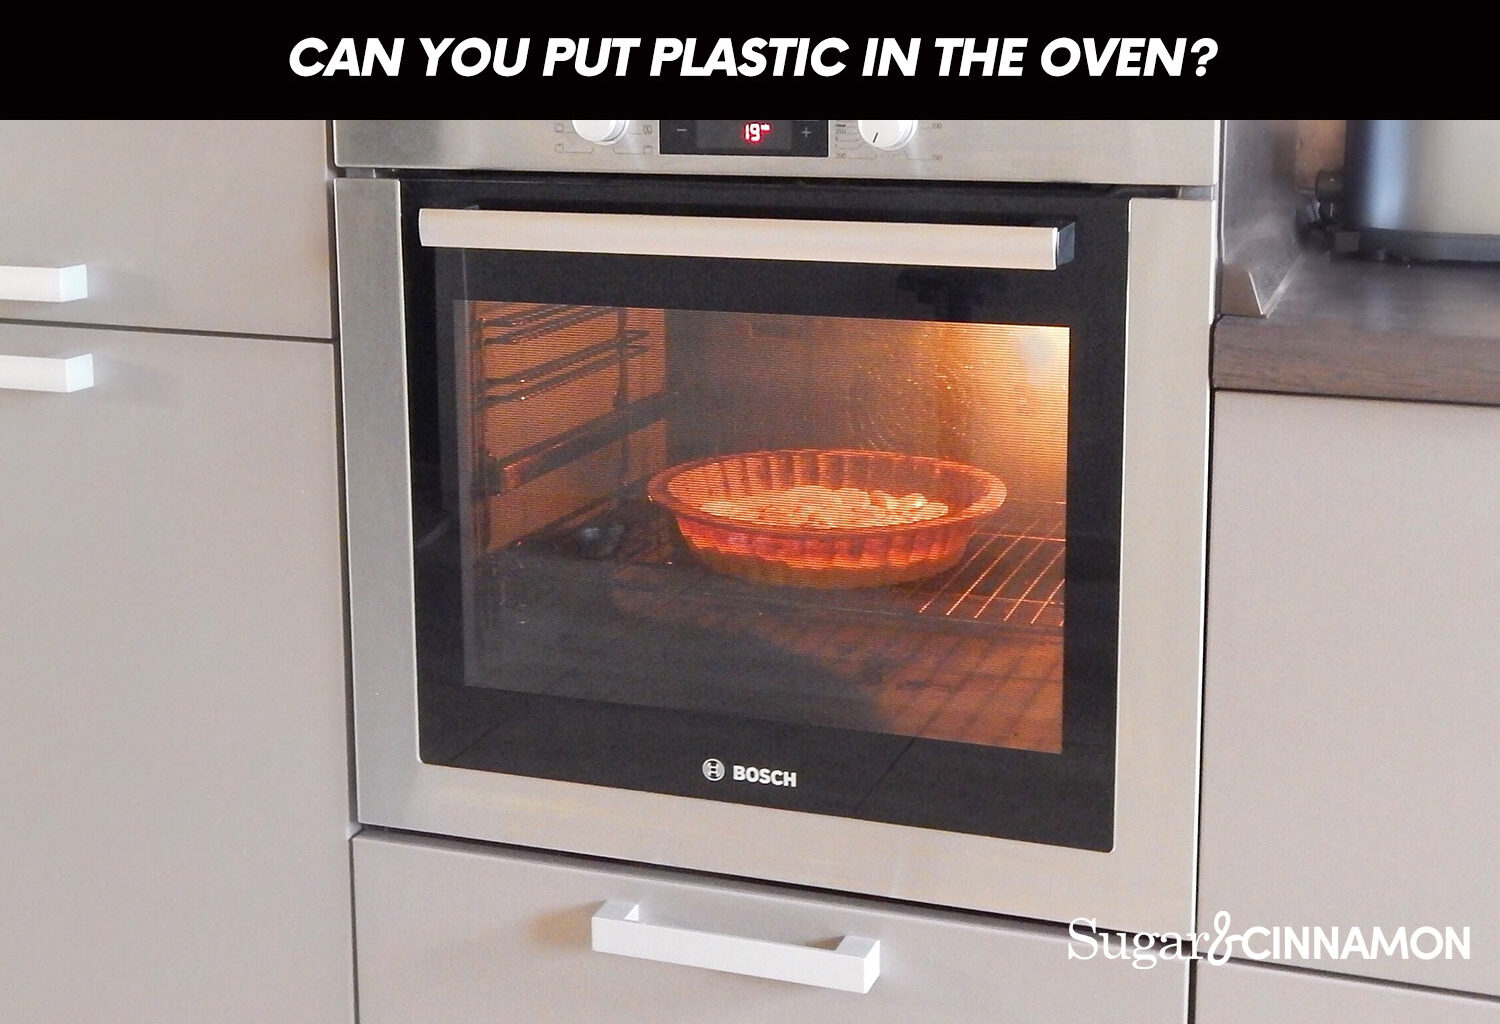 Can You Put Plastic In The Oven?